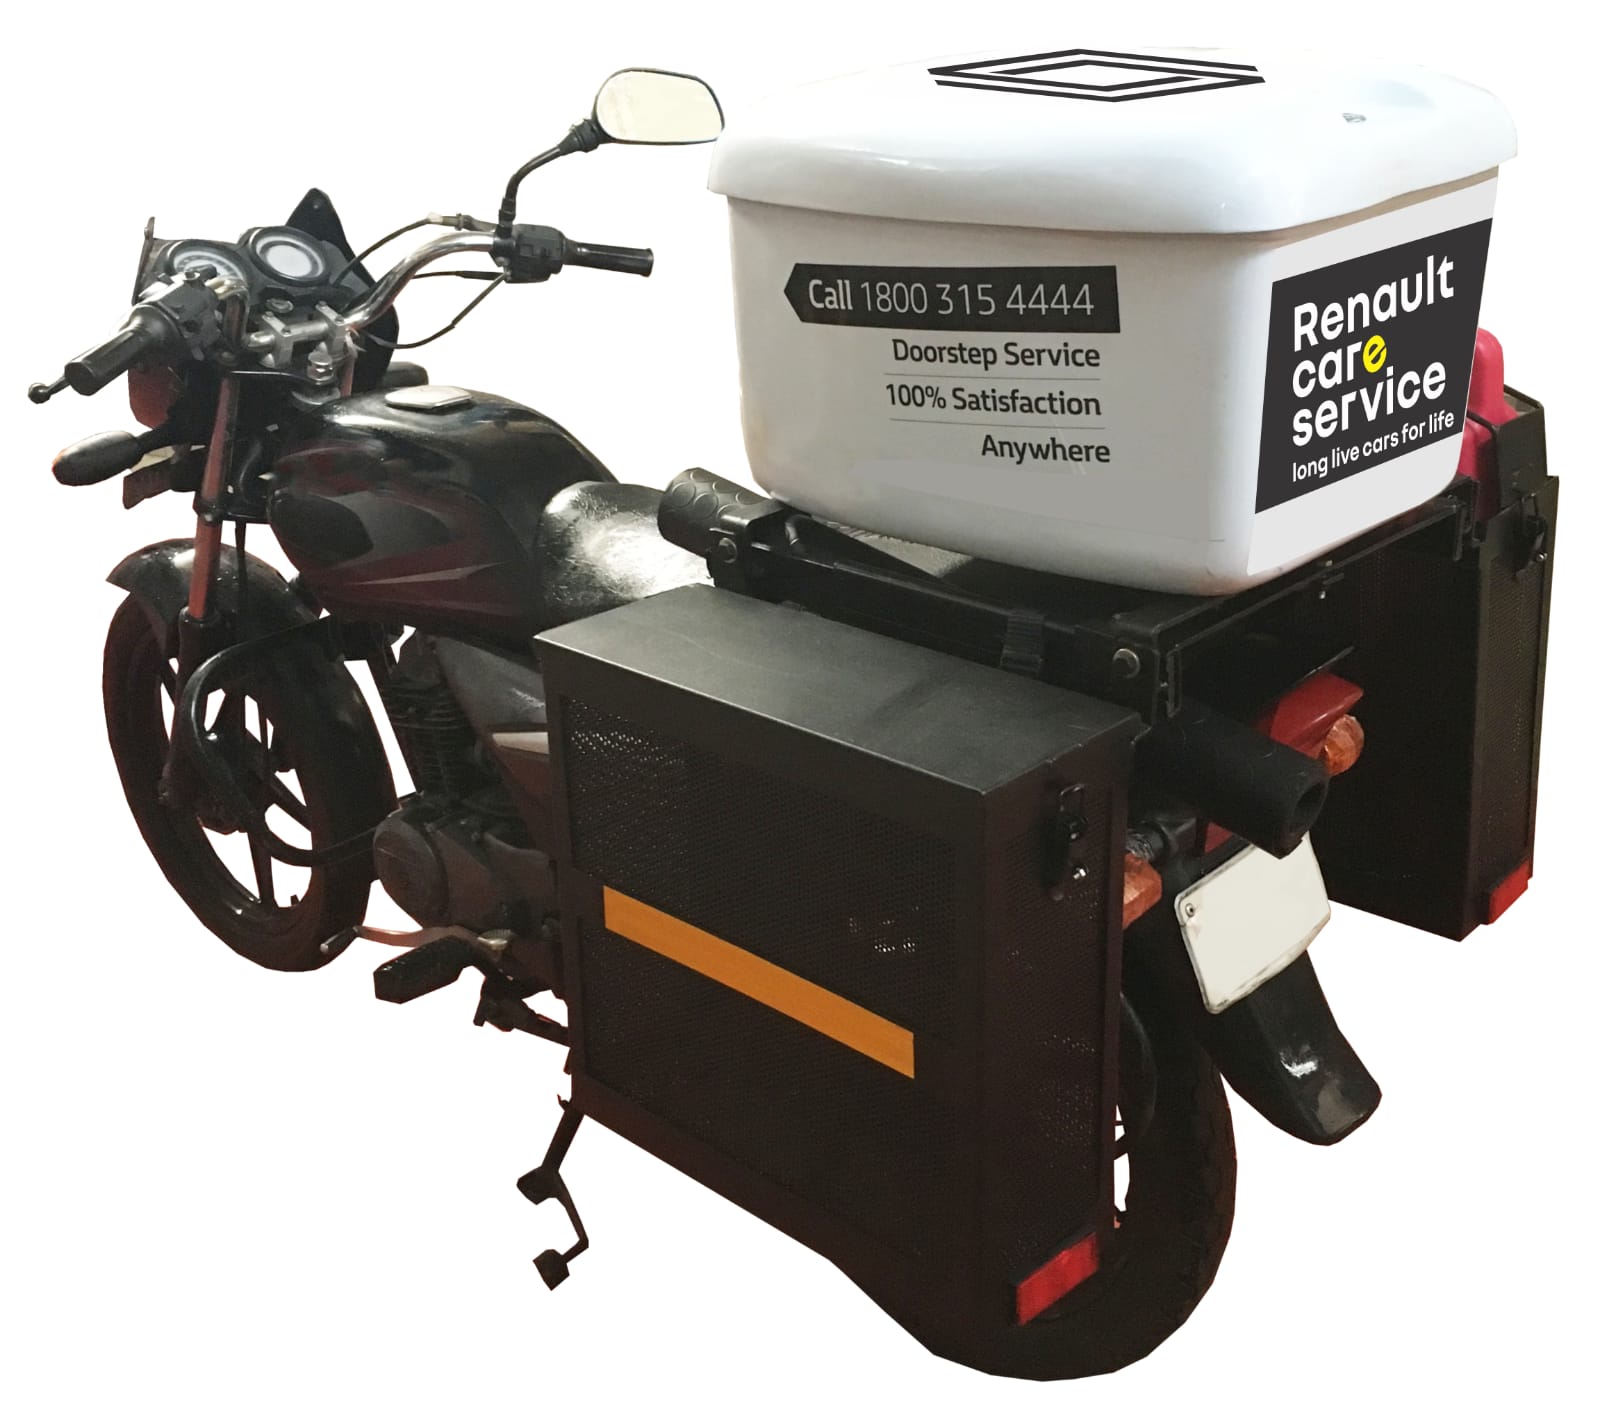 Renault Launches Mobile Workshop On Two Wheeler For Minor Repairs and Service